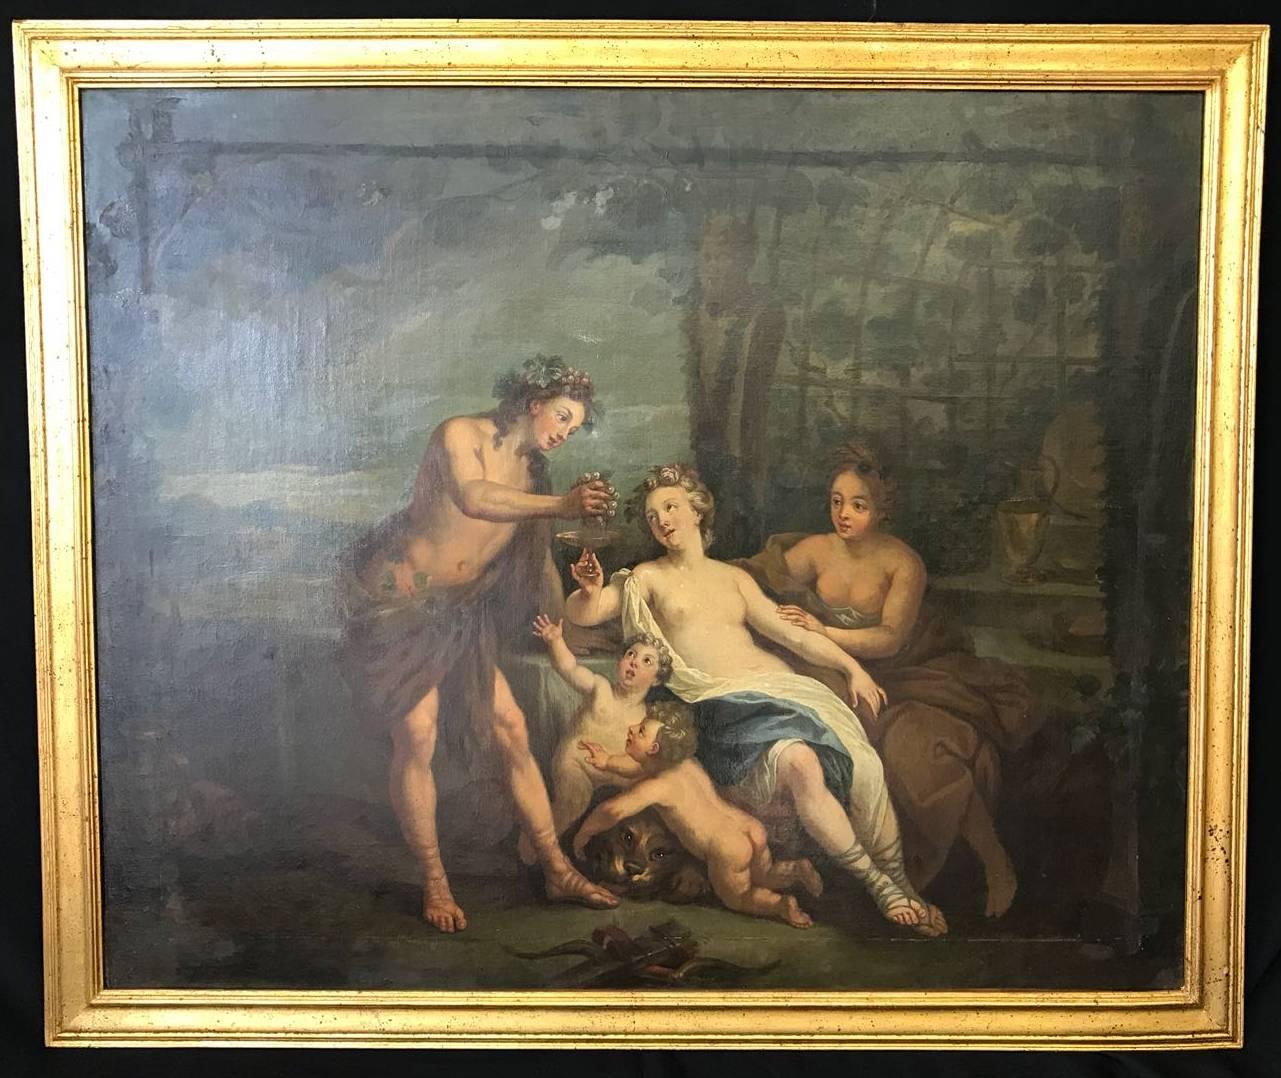 Unknown Portrait Painting - French School 18th Century "Bacchanal With Bacchus And Venus"